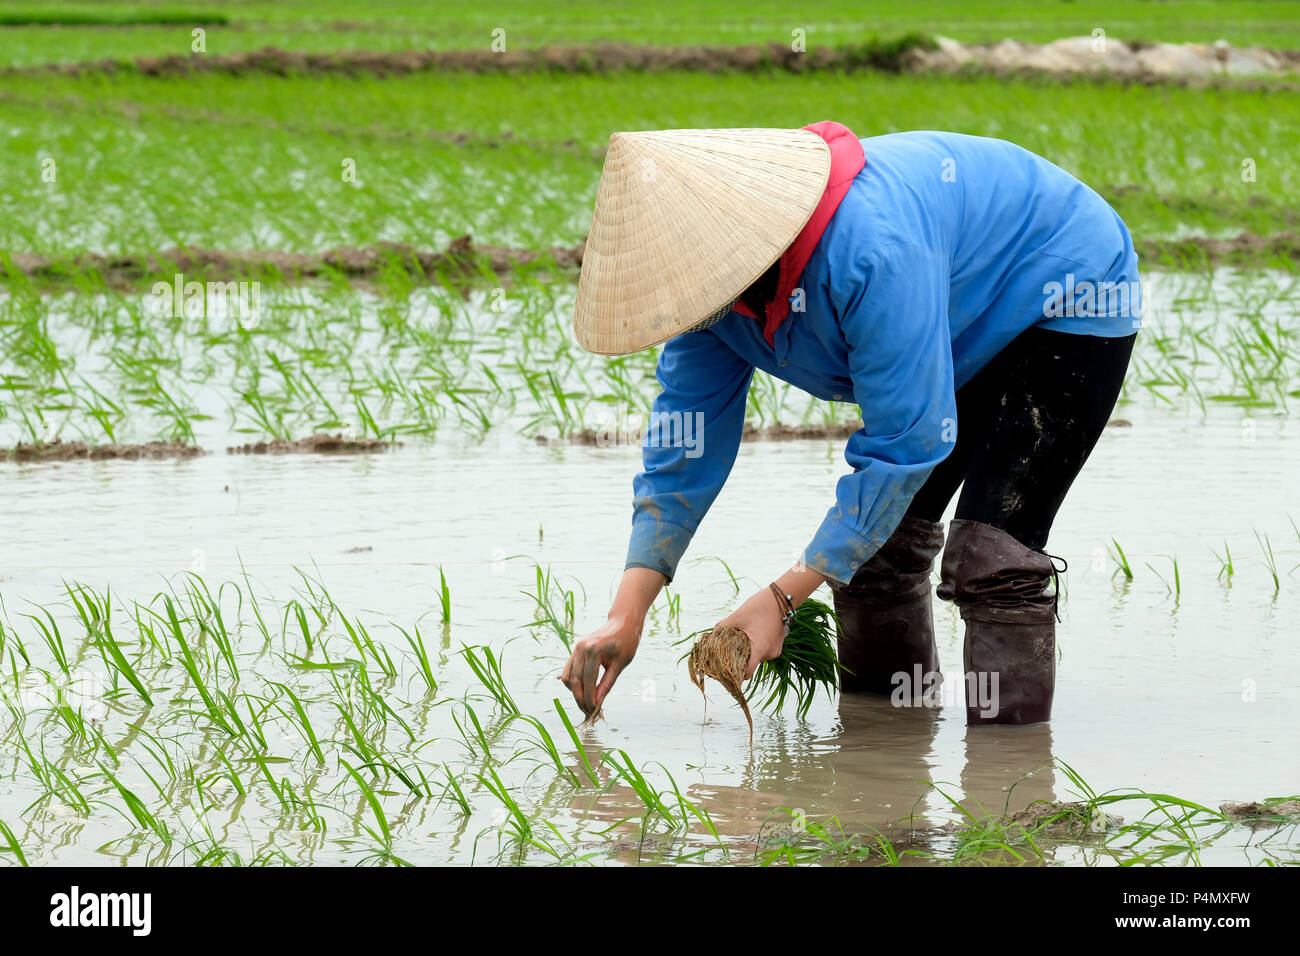 Woman planting rice in a paddy in Nam Dinh province, Vietnam Stock Photo